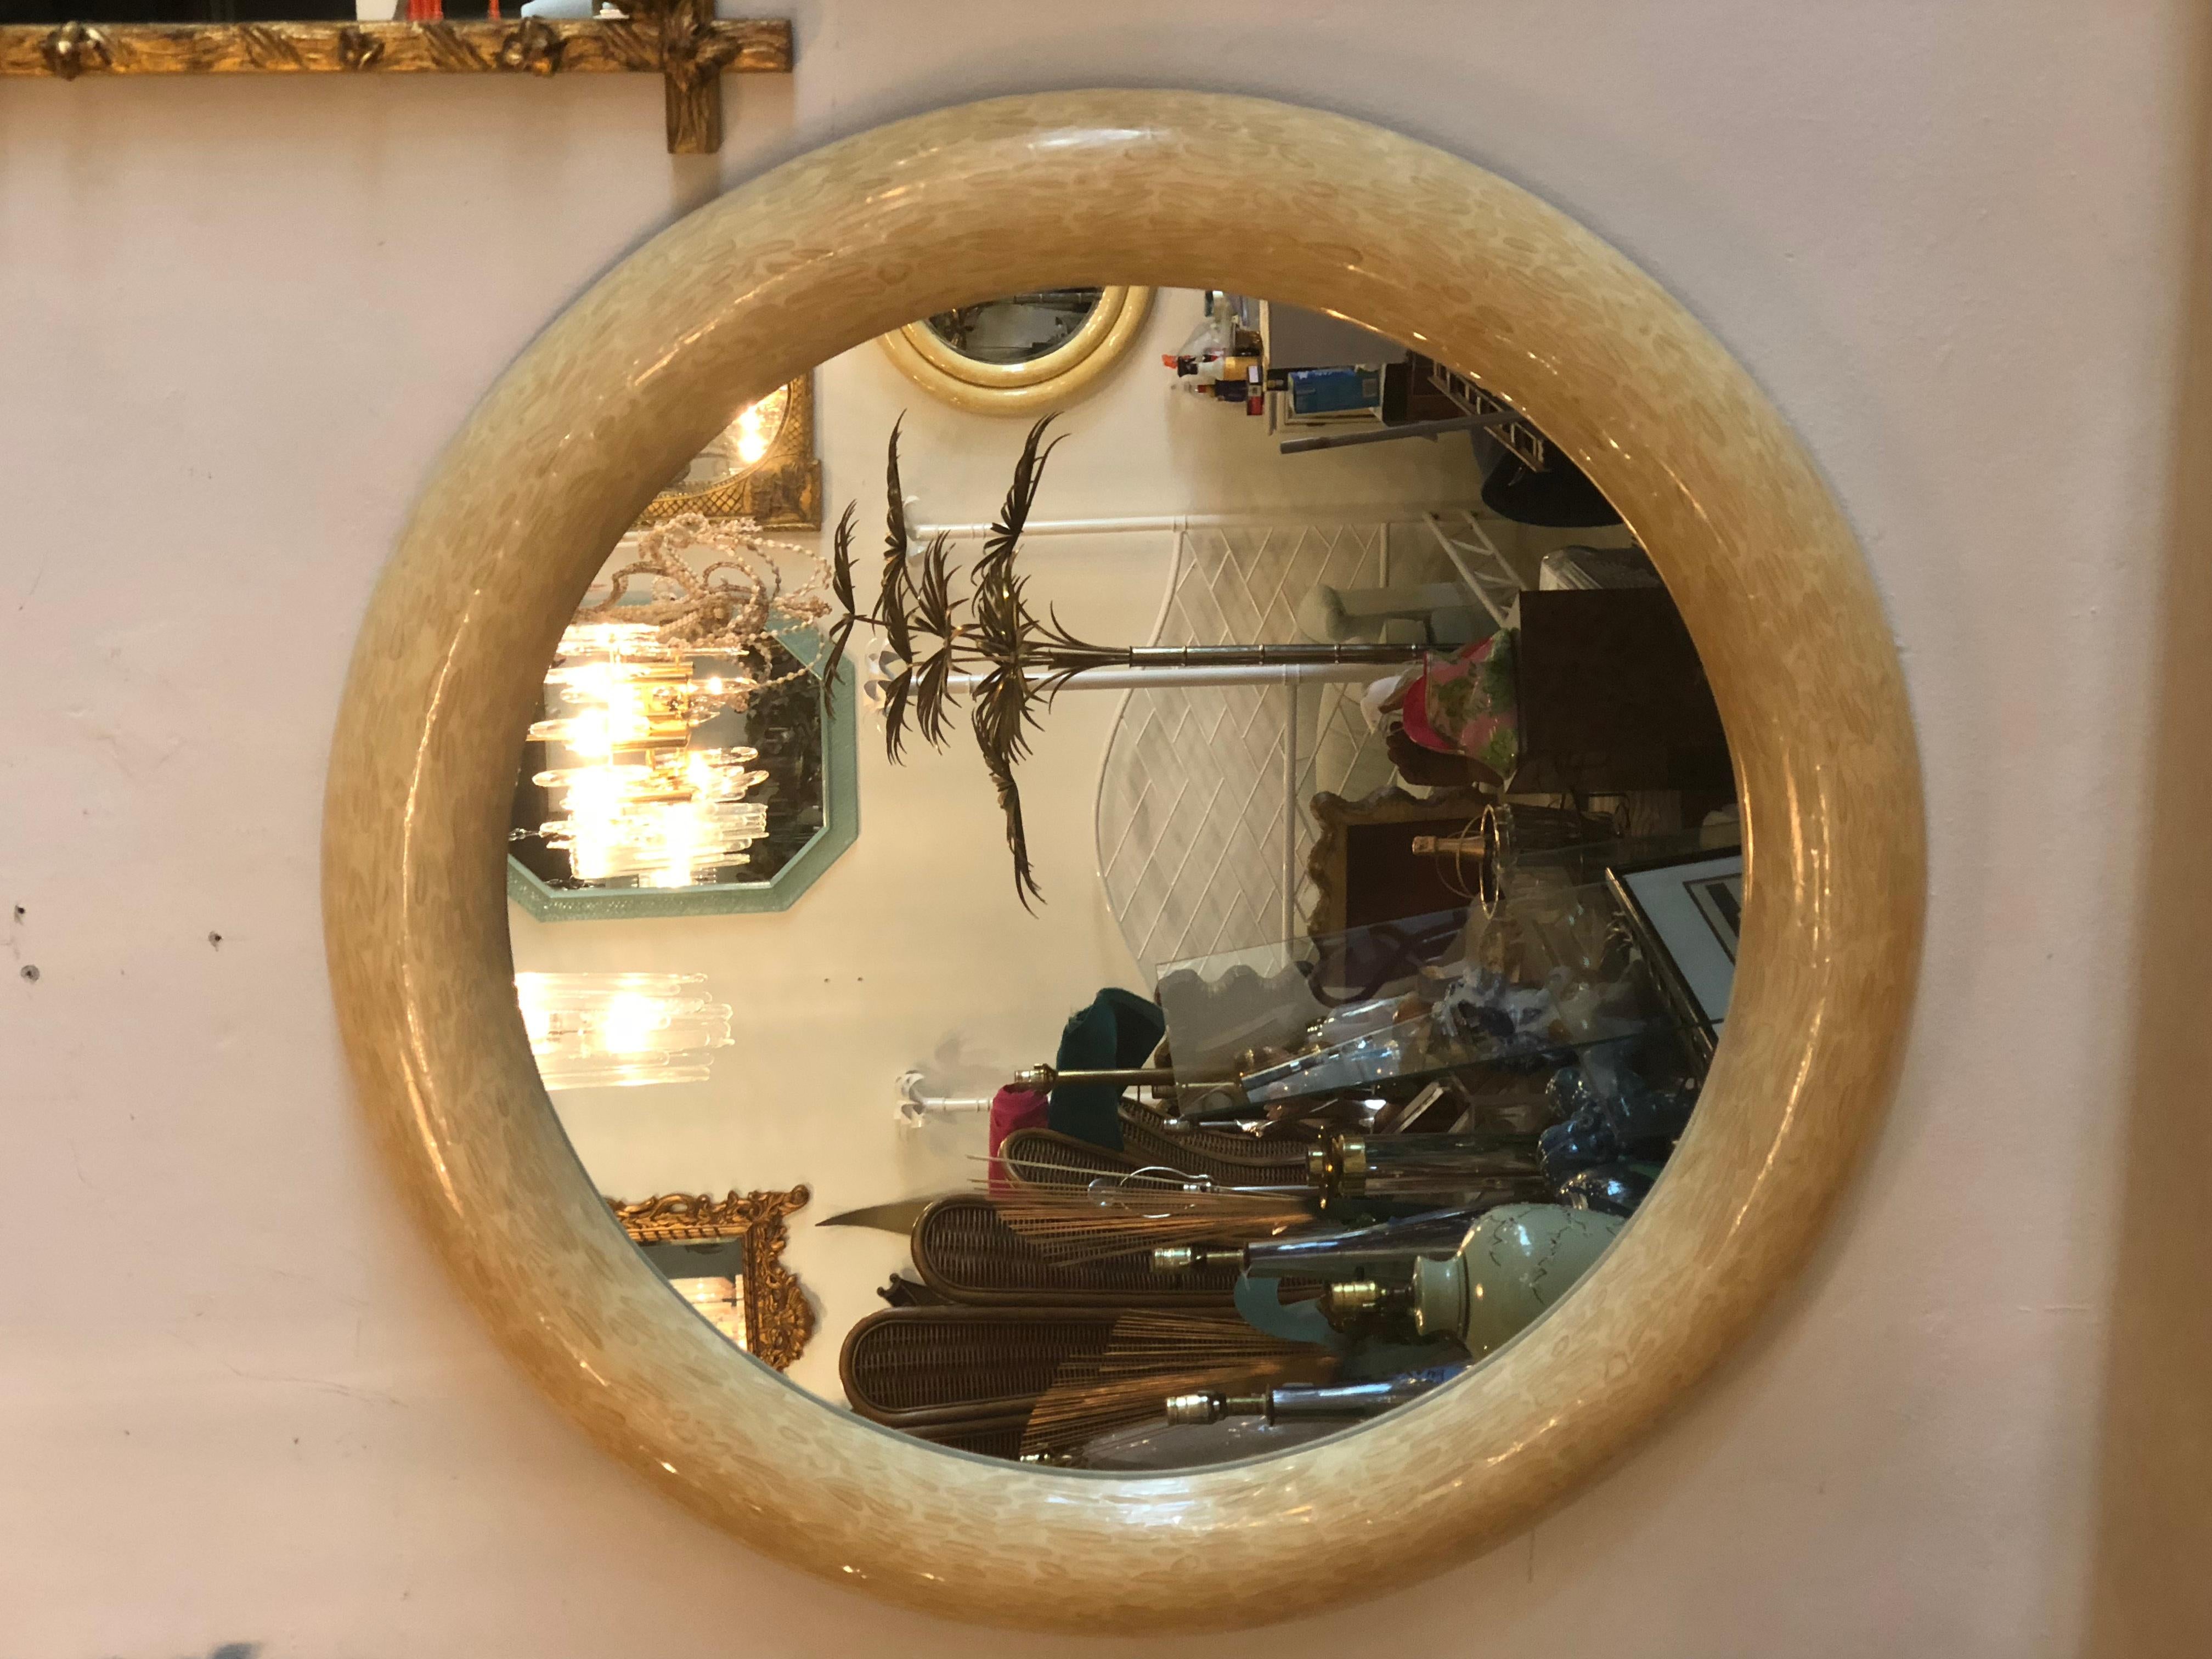 Vintage antler bone console table and round mirror with brass accents. Brass was left original and not polished but can be if desired.
Mirror is 48” diameter x 3” deep.